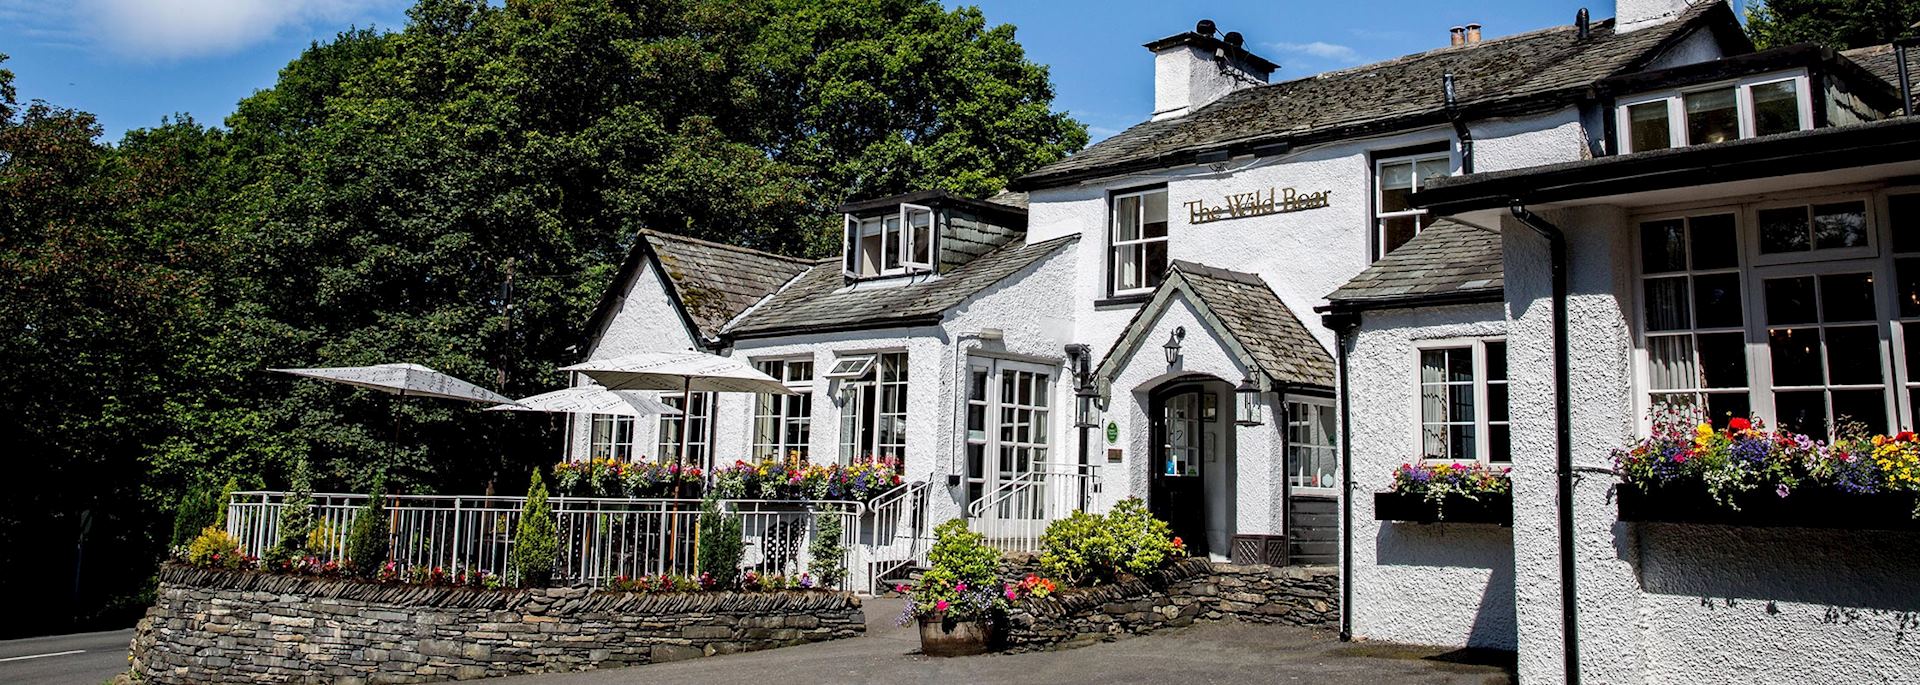 The Wild Boar, The Lake District